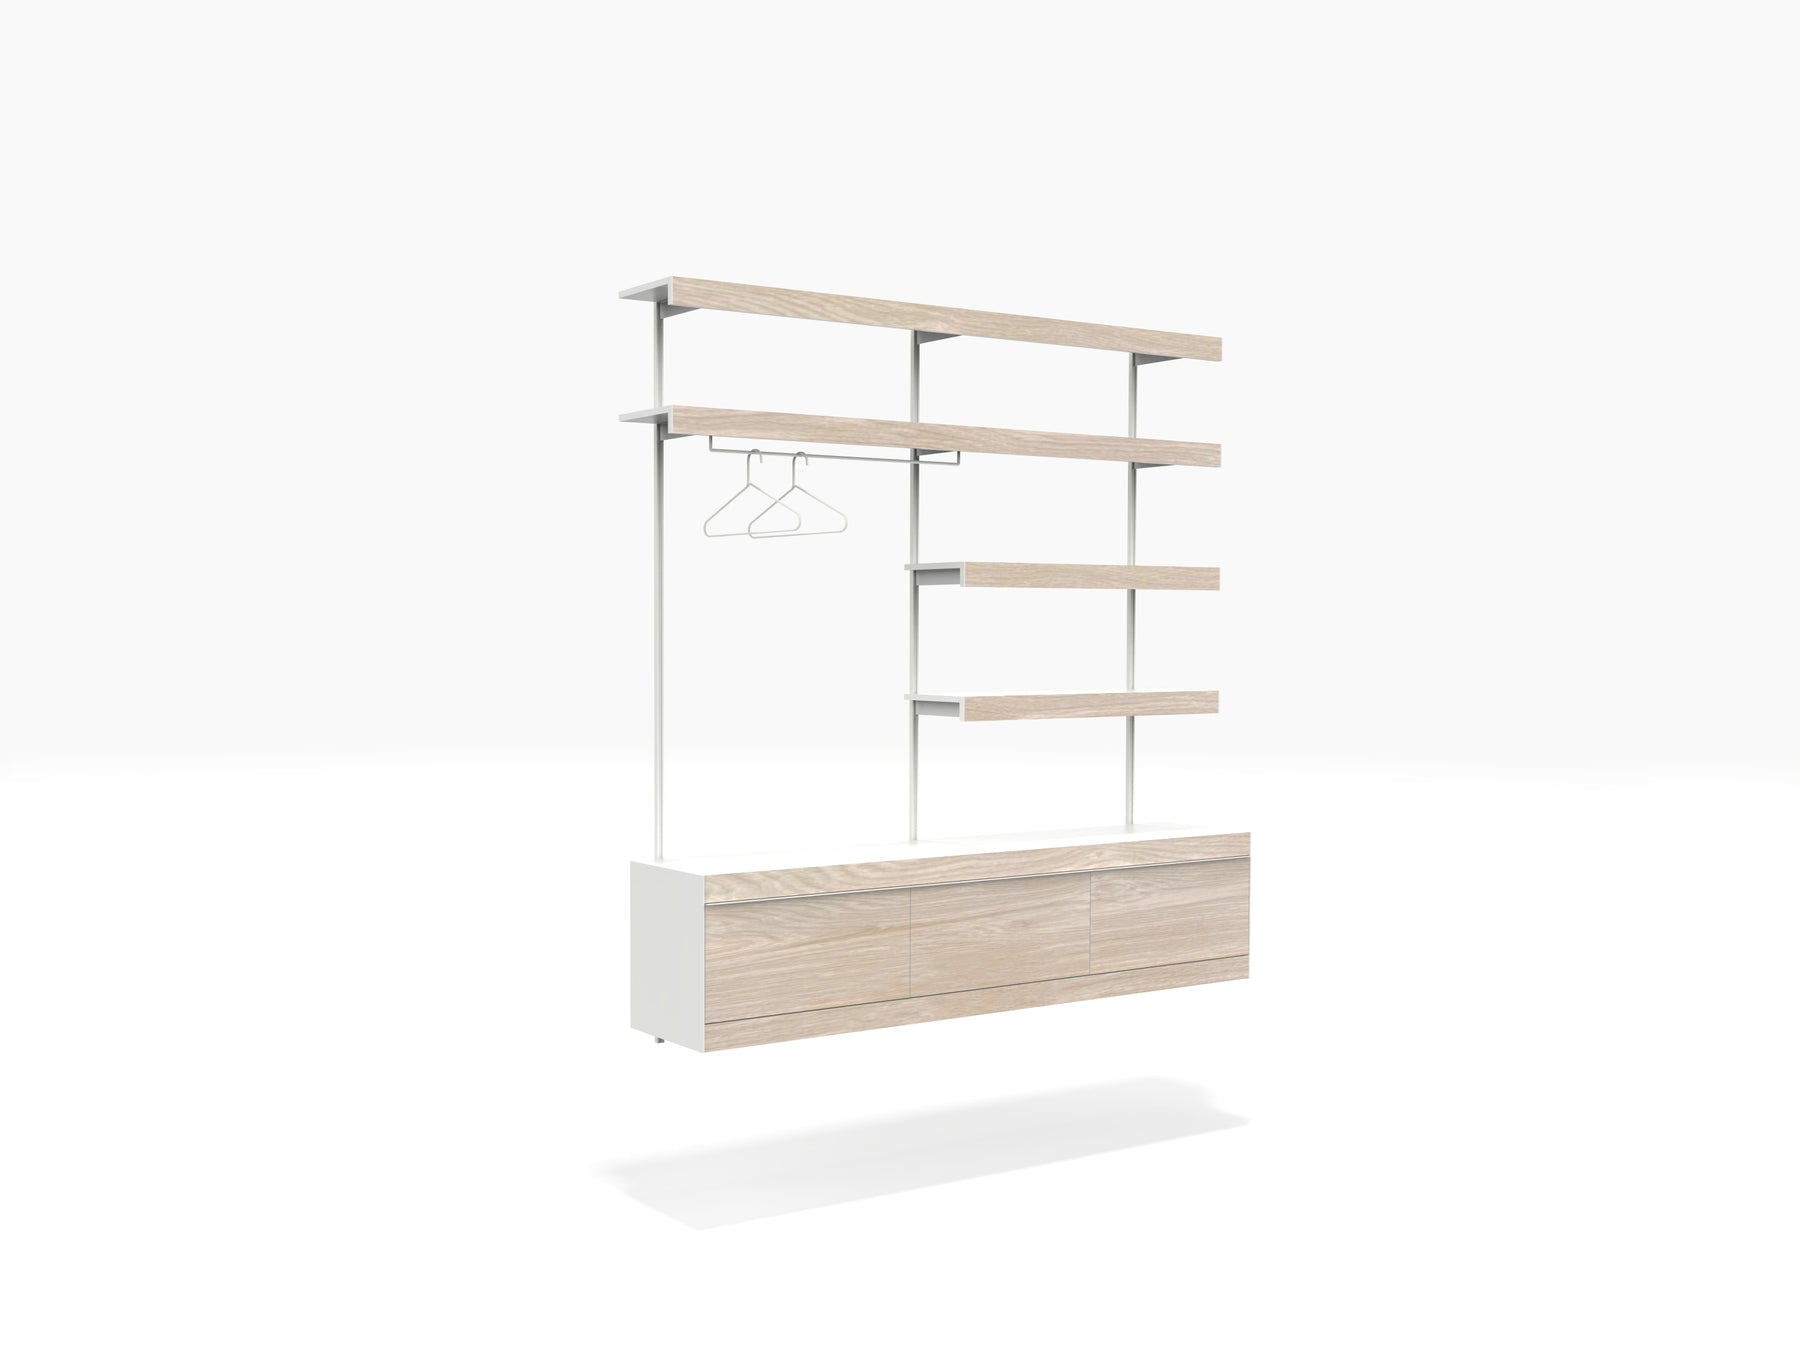 Made to measure open wardrobe shelving system